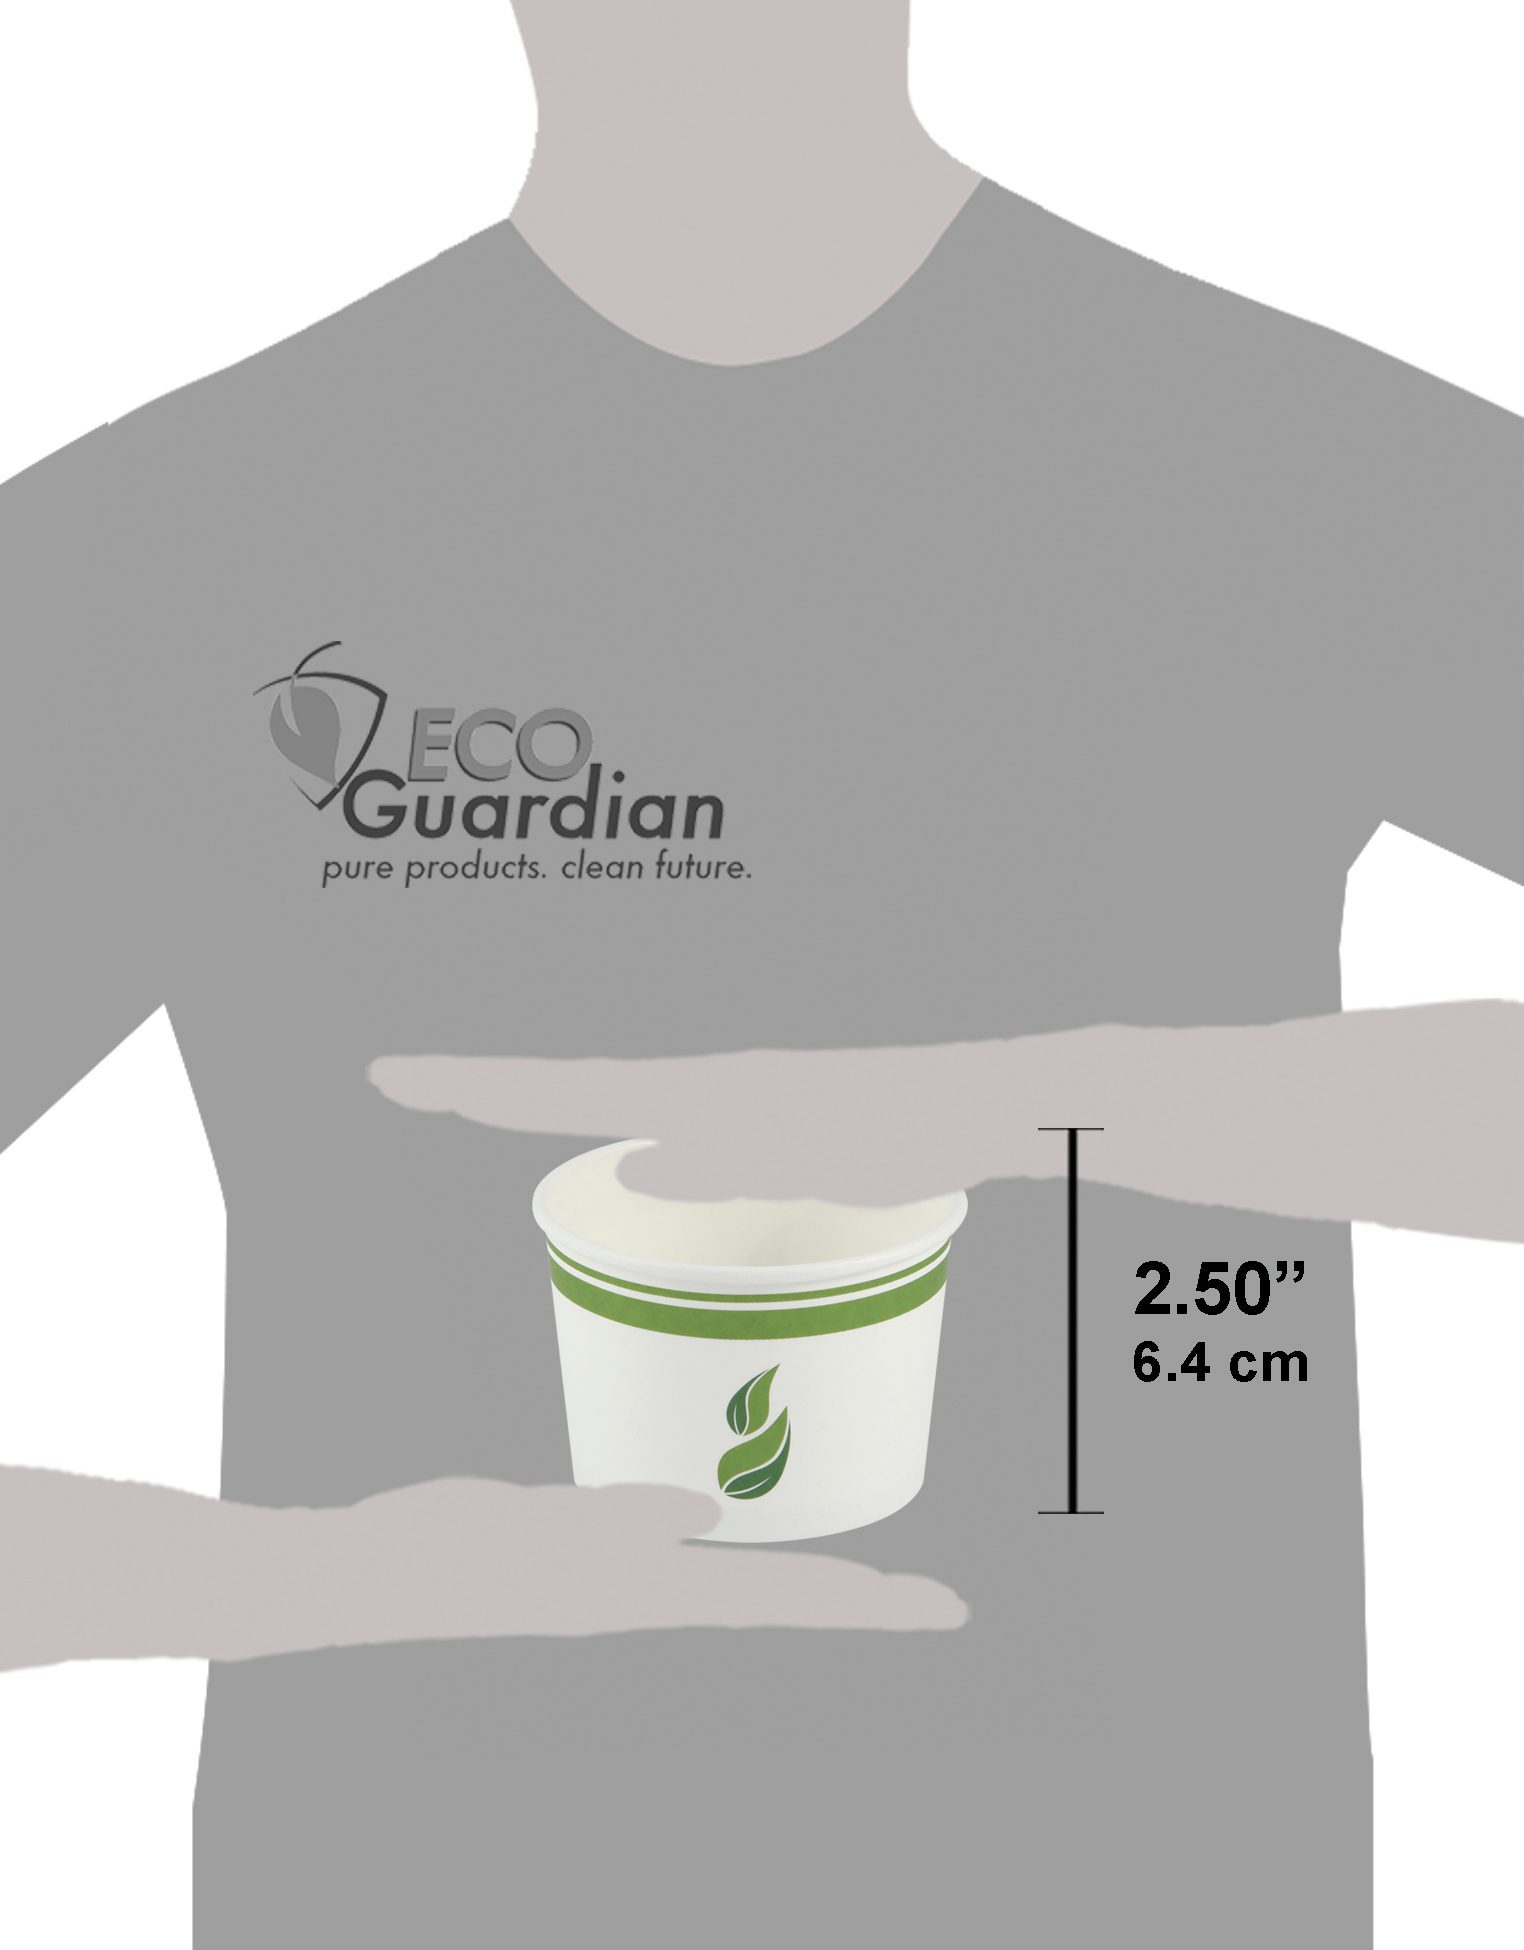 Graphic Packaging 316603019 Ecotainer™ Polystyrene 8 oz Soup Container Flat  Lids - 3 7/8Dia. x 1/2H